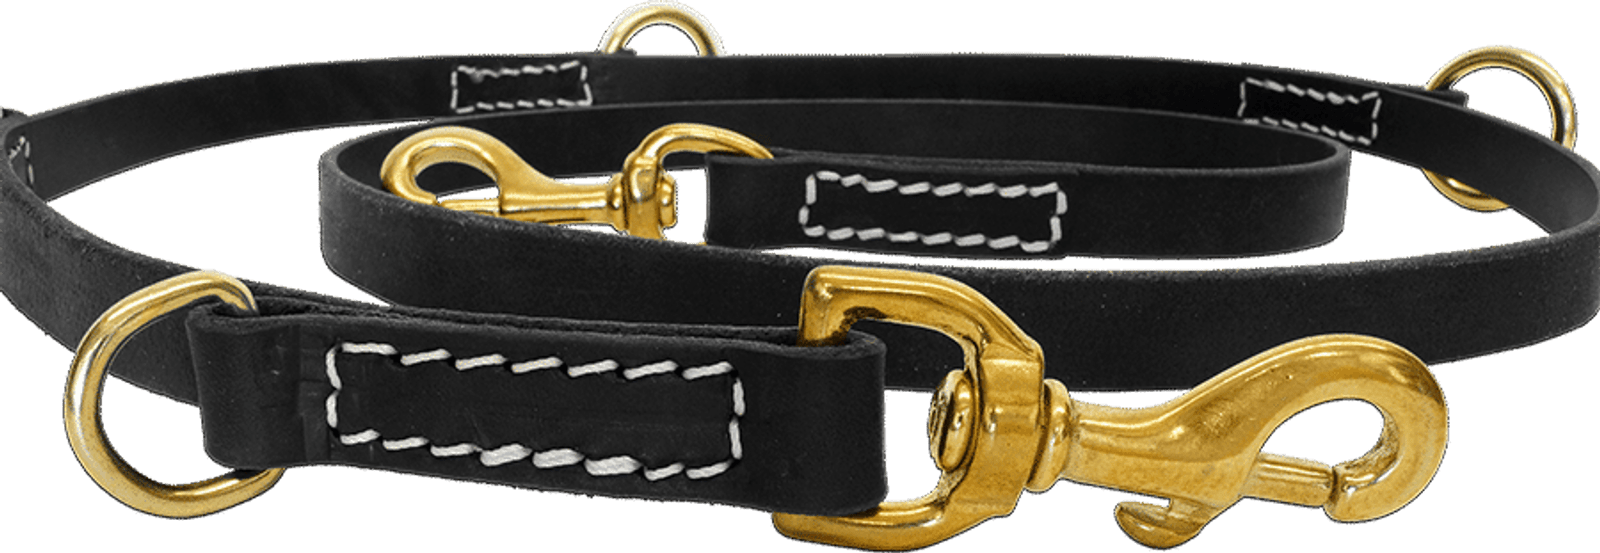 Securable Leather Dog Leash 3/4 wide - Leathersmith Designs Inc.